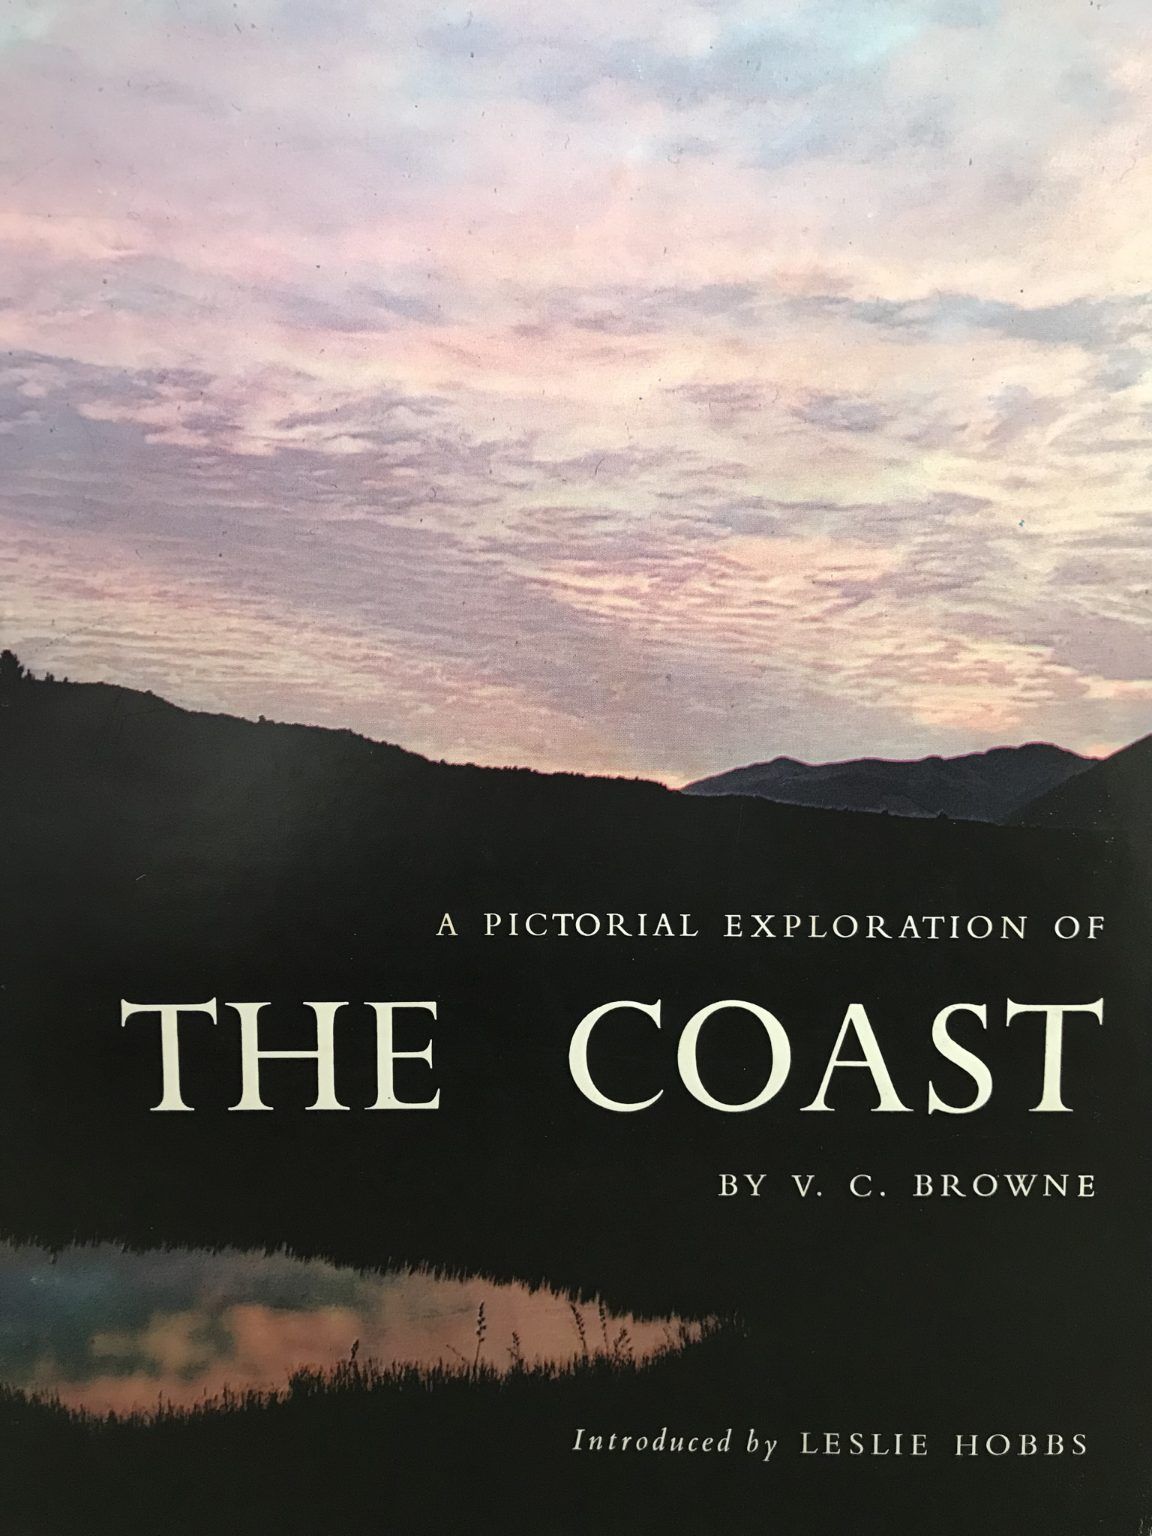 THE COAST: A Pictorial Exploration